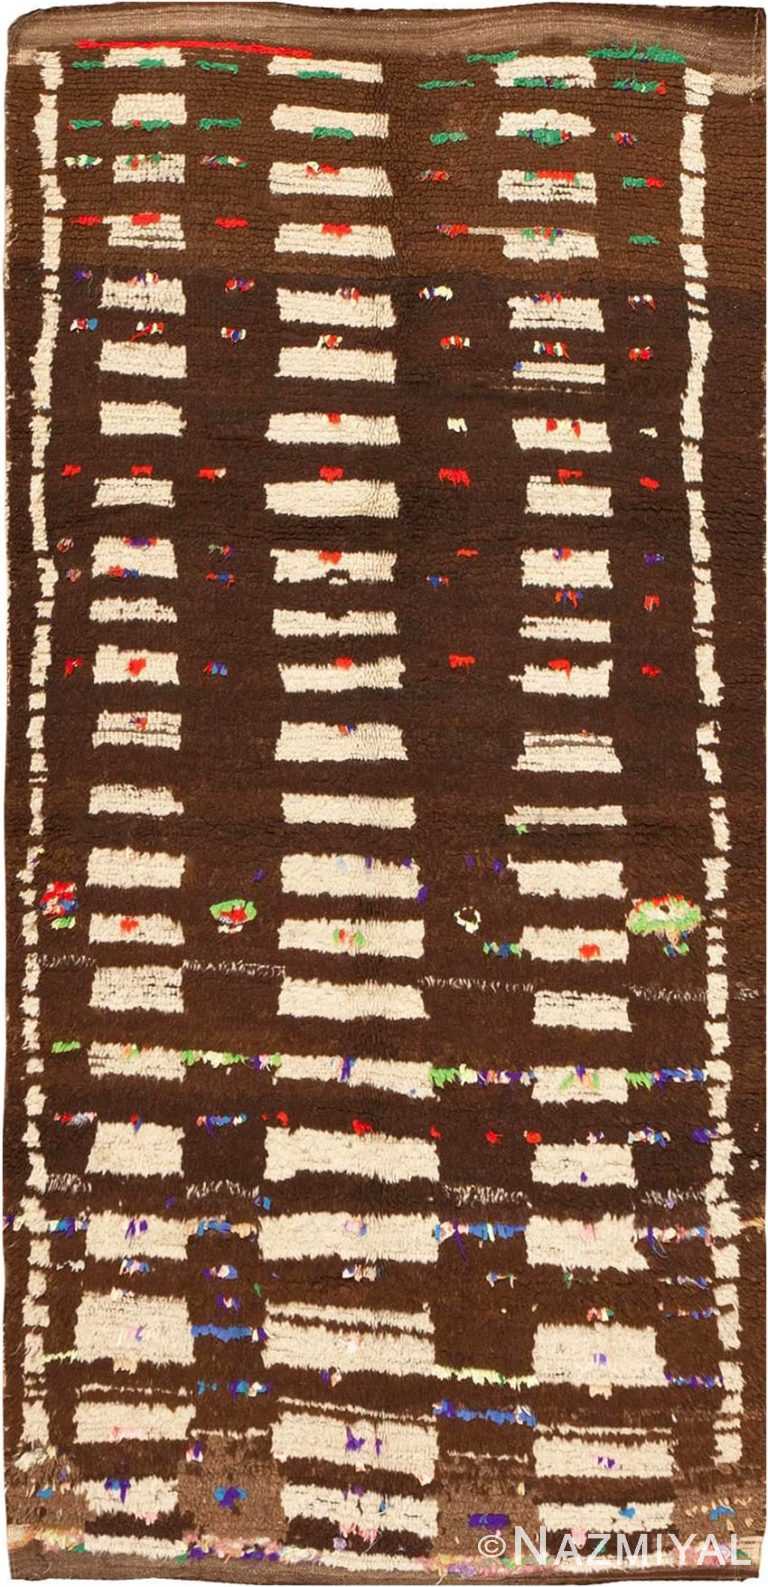 Picture of Vintage Mid Century Moroccan Berber Rug 46441 from Nazmiyal Antique Rugs in NYC